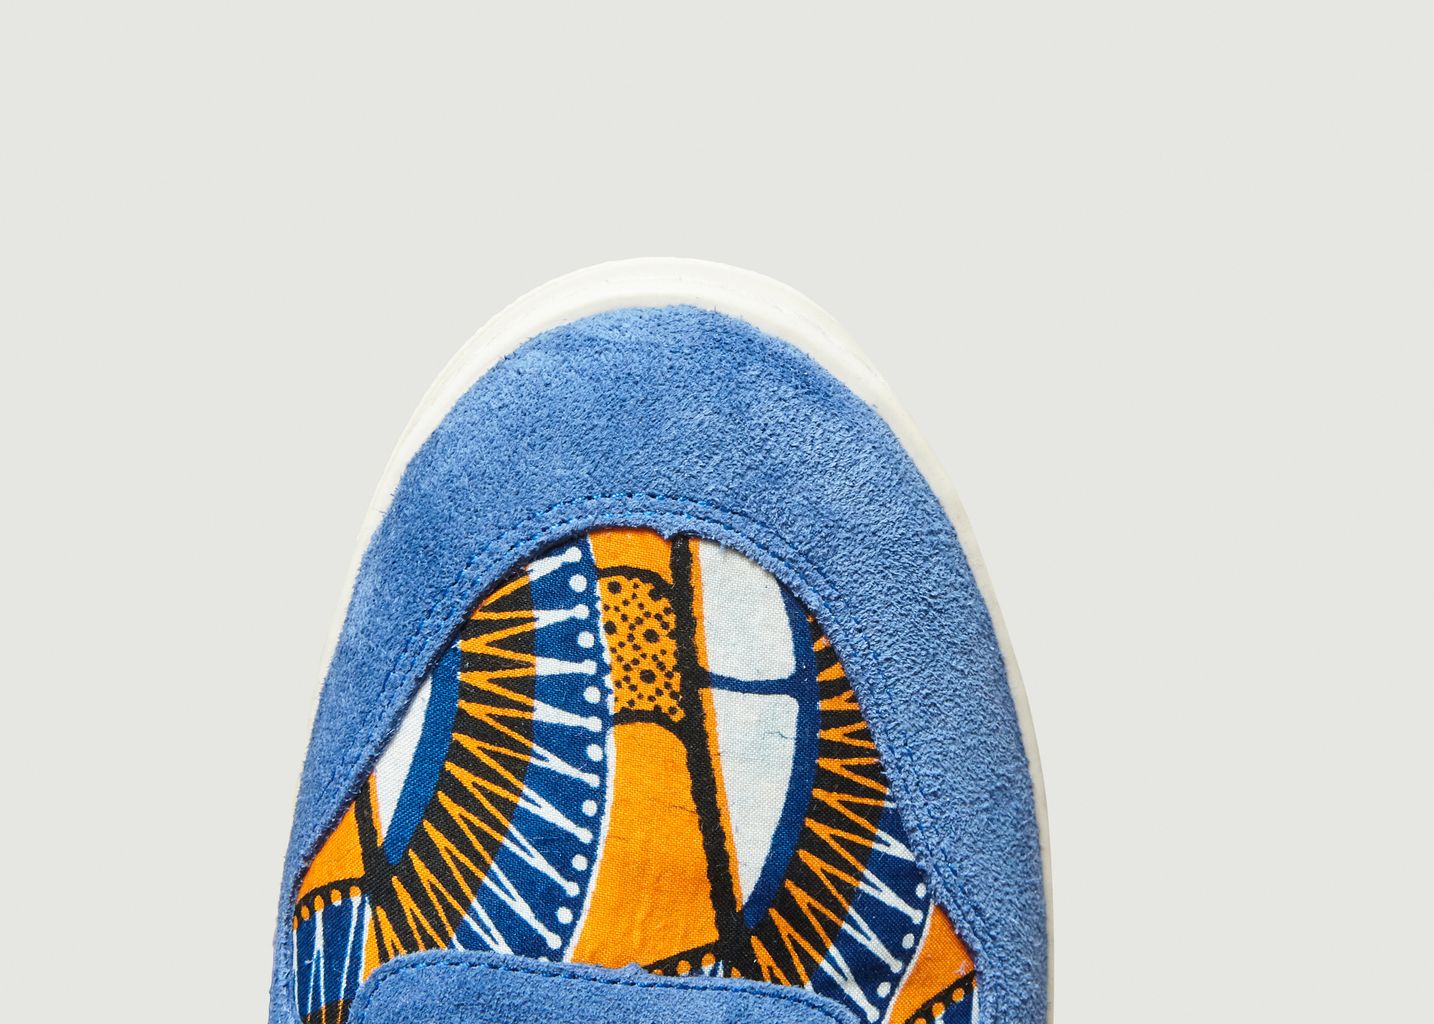 Sahara suede leather and denim sneakers - Panafrica